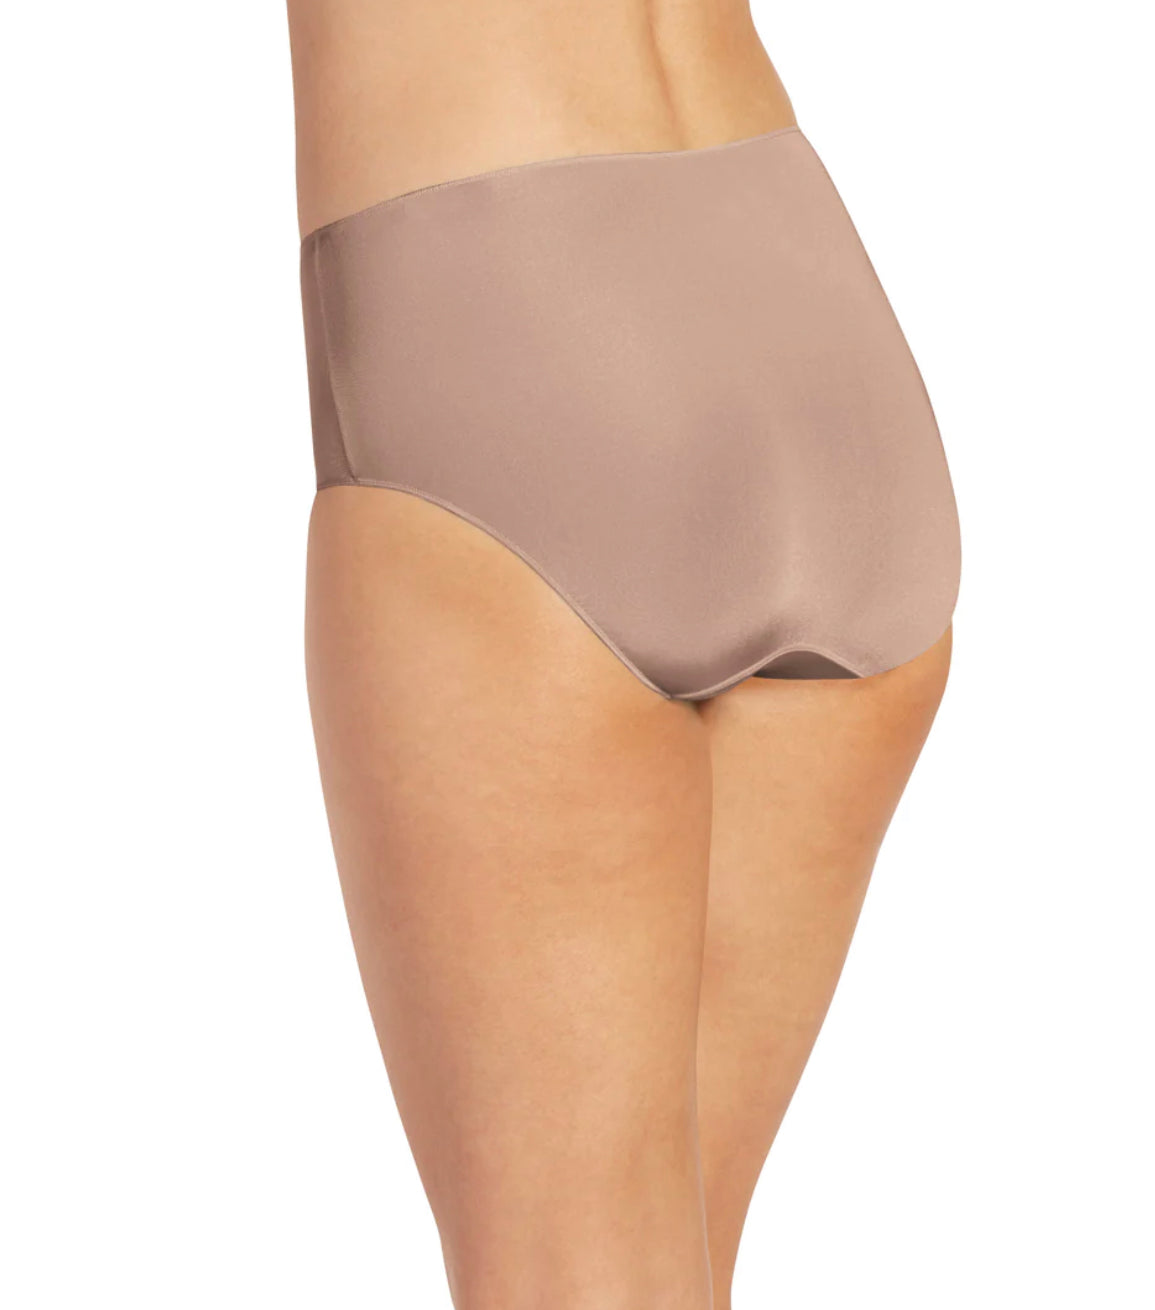 Jockey Hip Brief (Light) has squared-off legs for full-coverage while our unique leg binding helps eliminate panty lines.